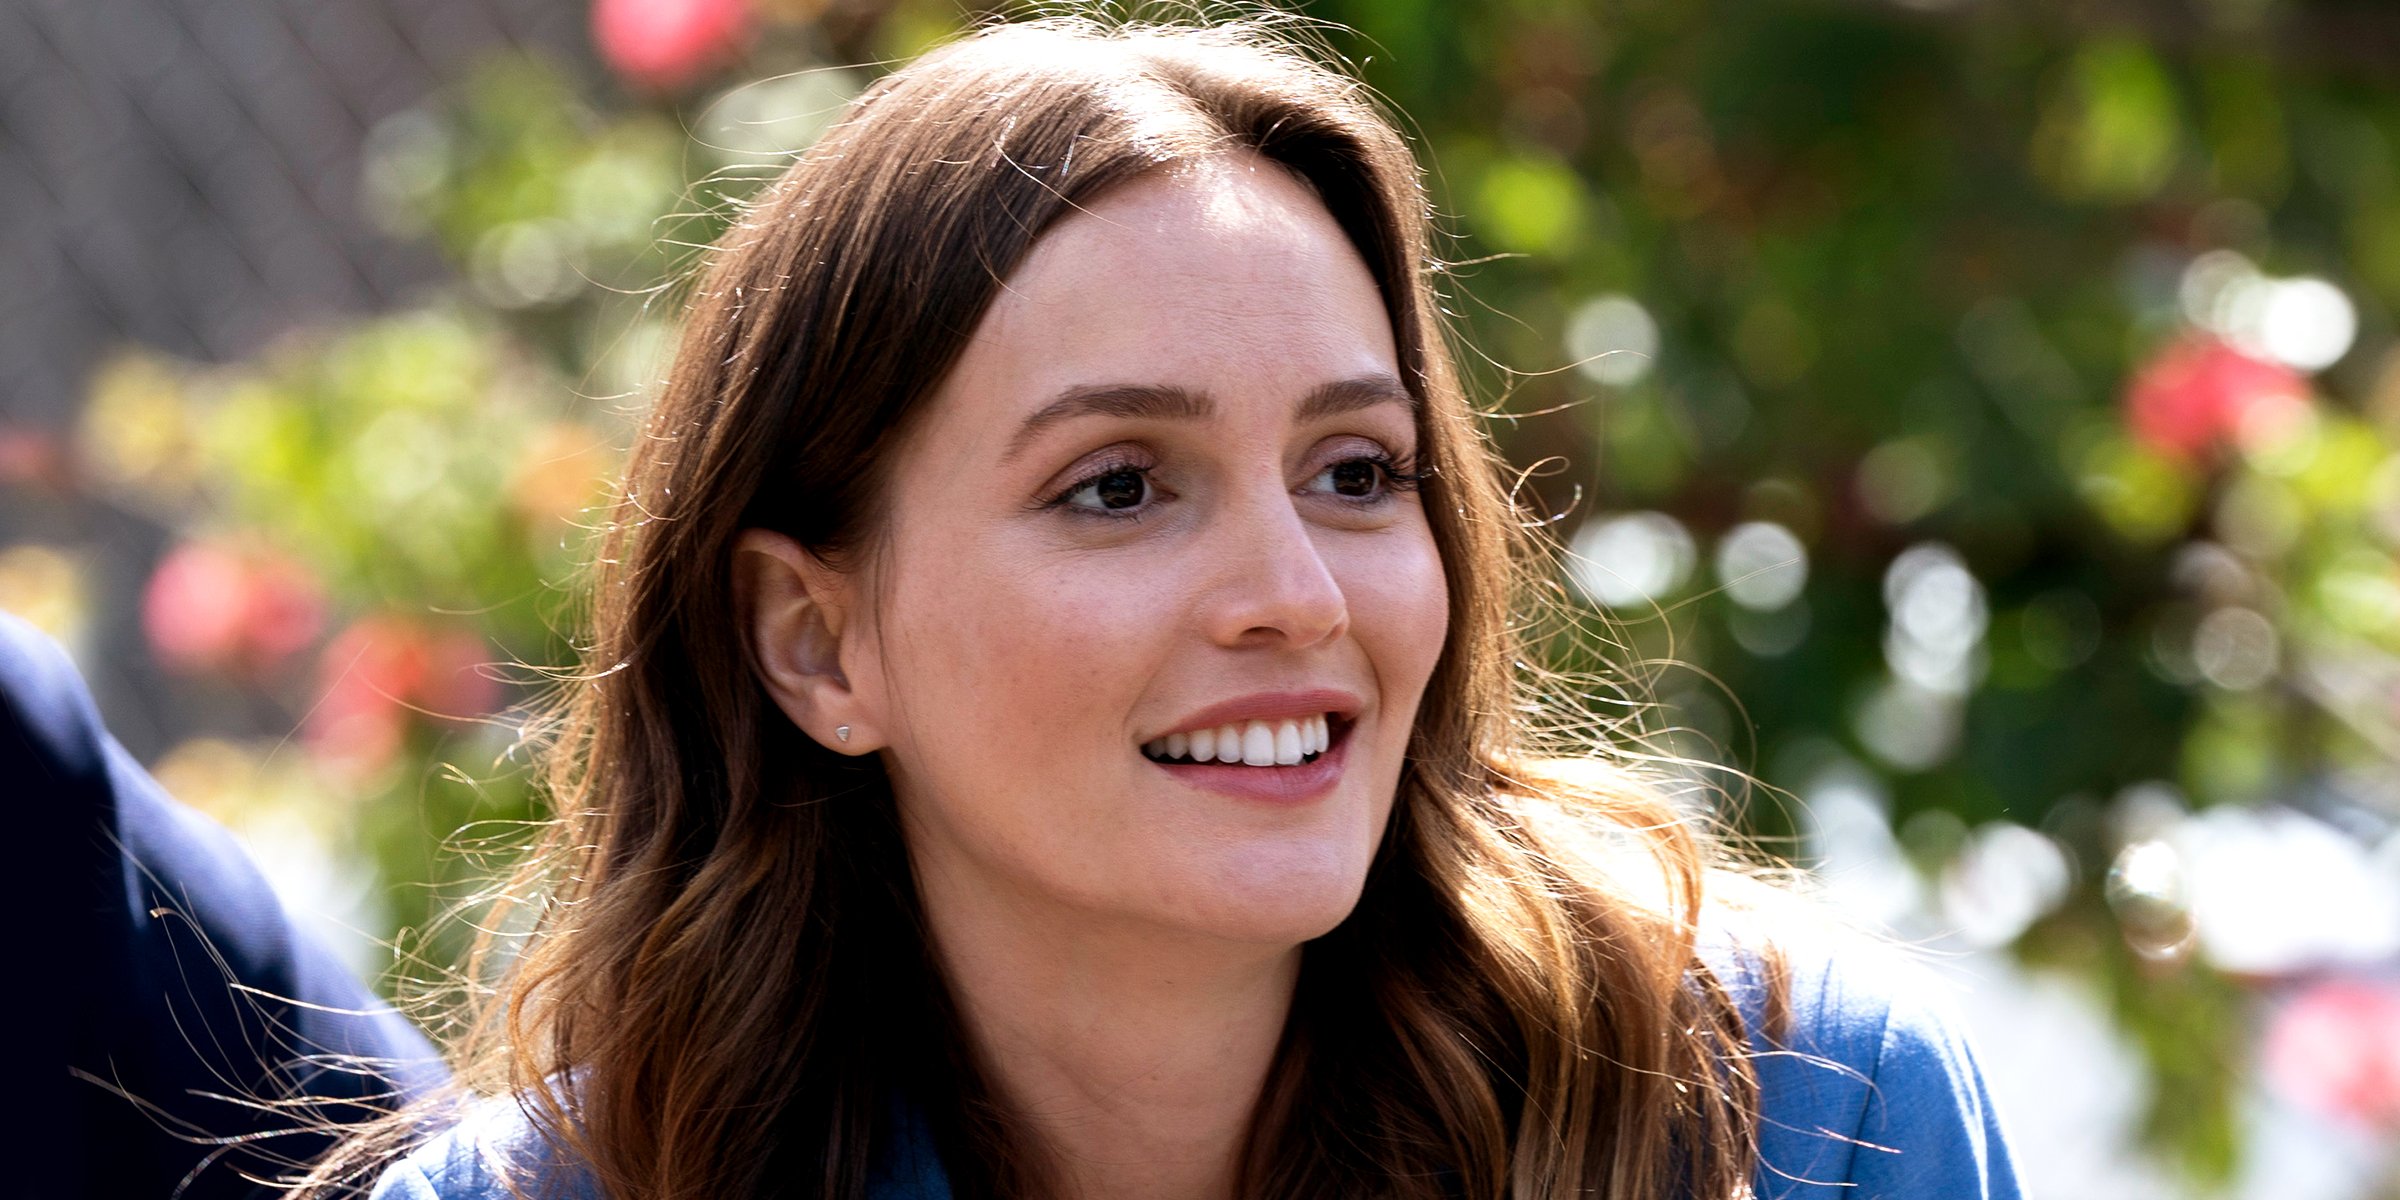 Leighton Meester | Source: Getty Images